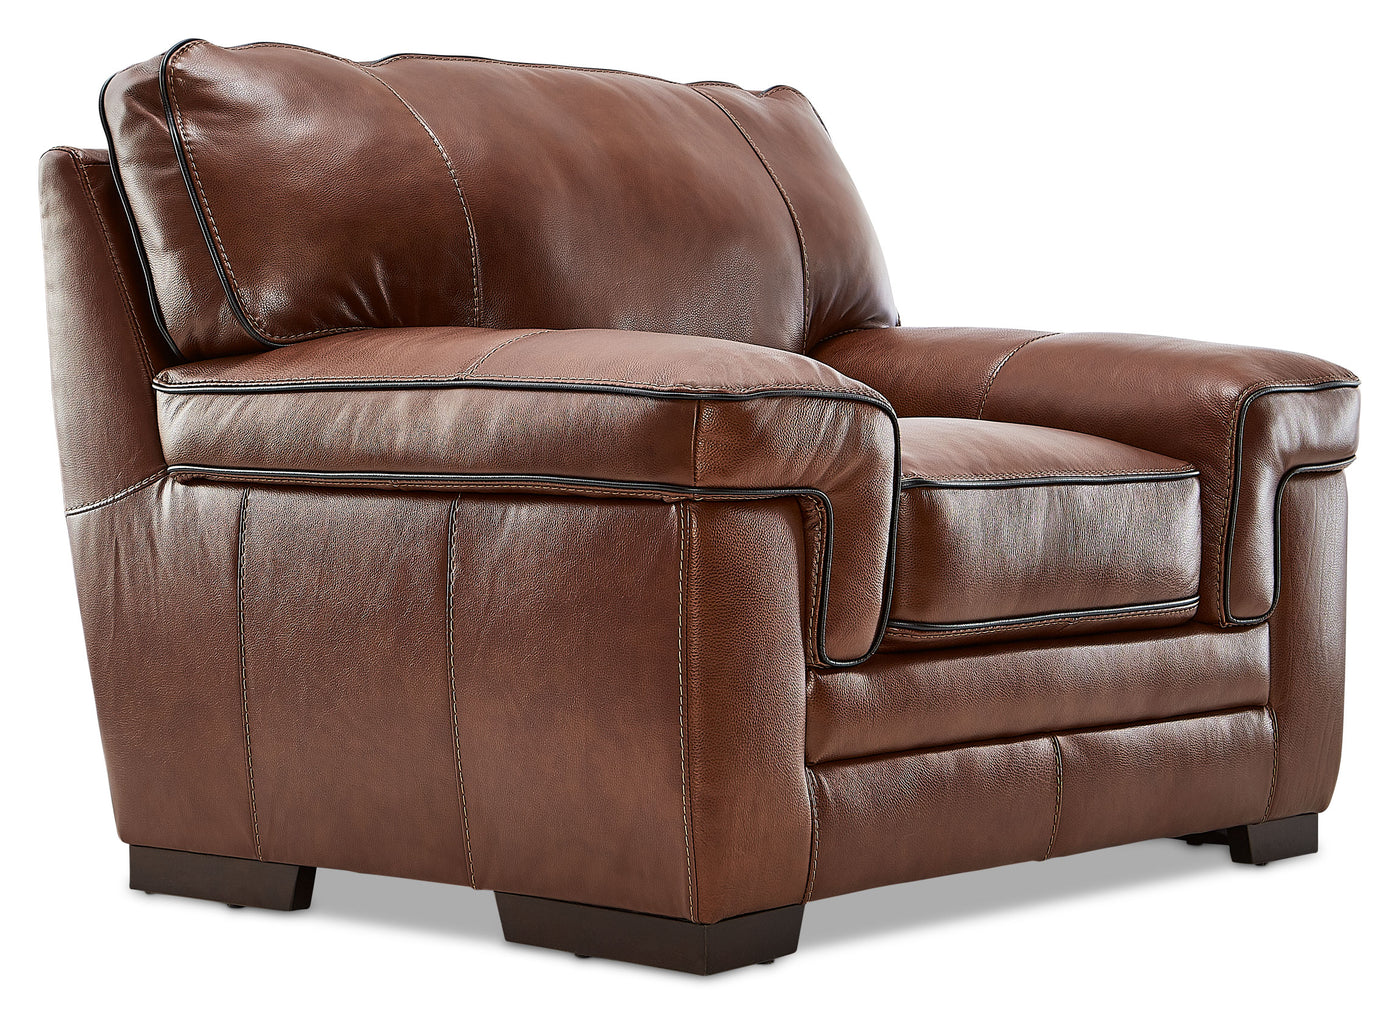 Stampede Leather Sofa, Loveseat and Chair Set - Cognac